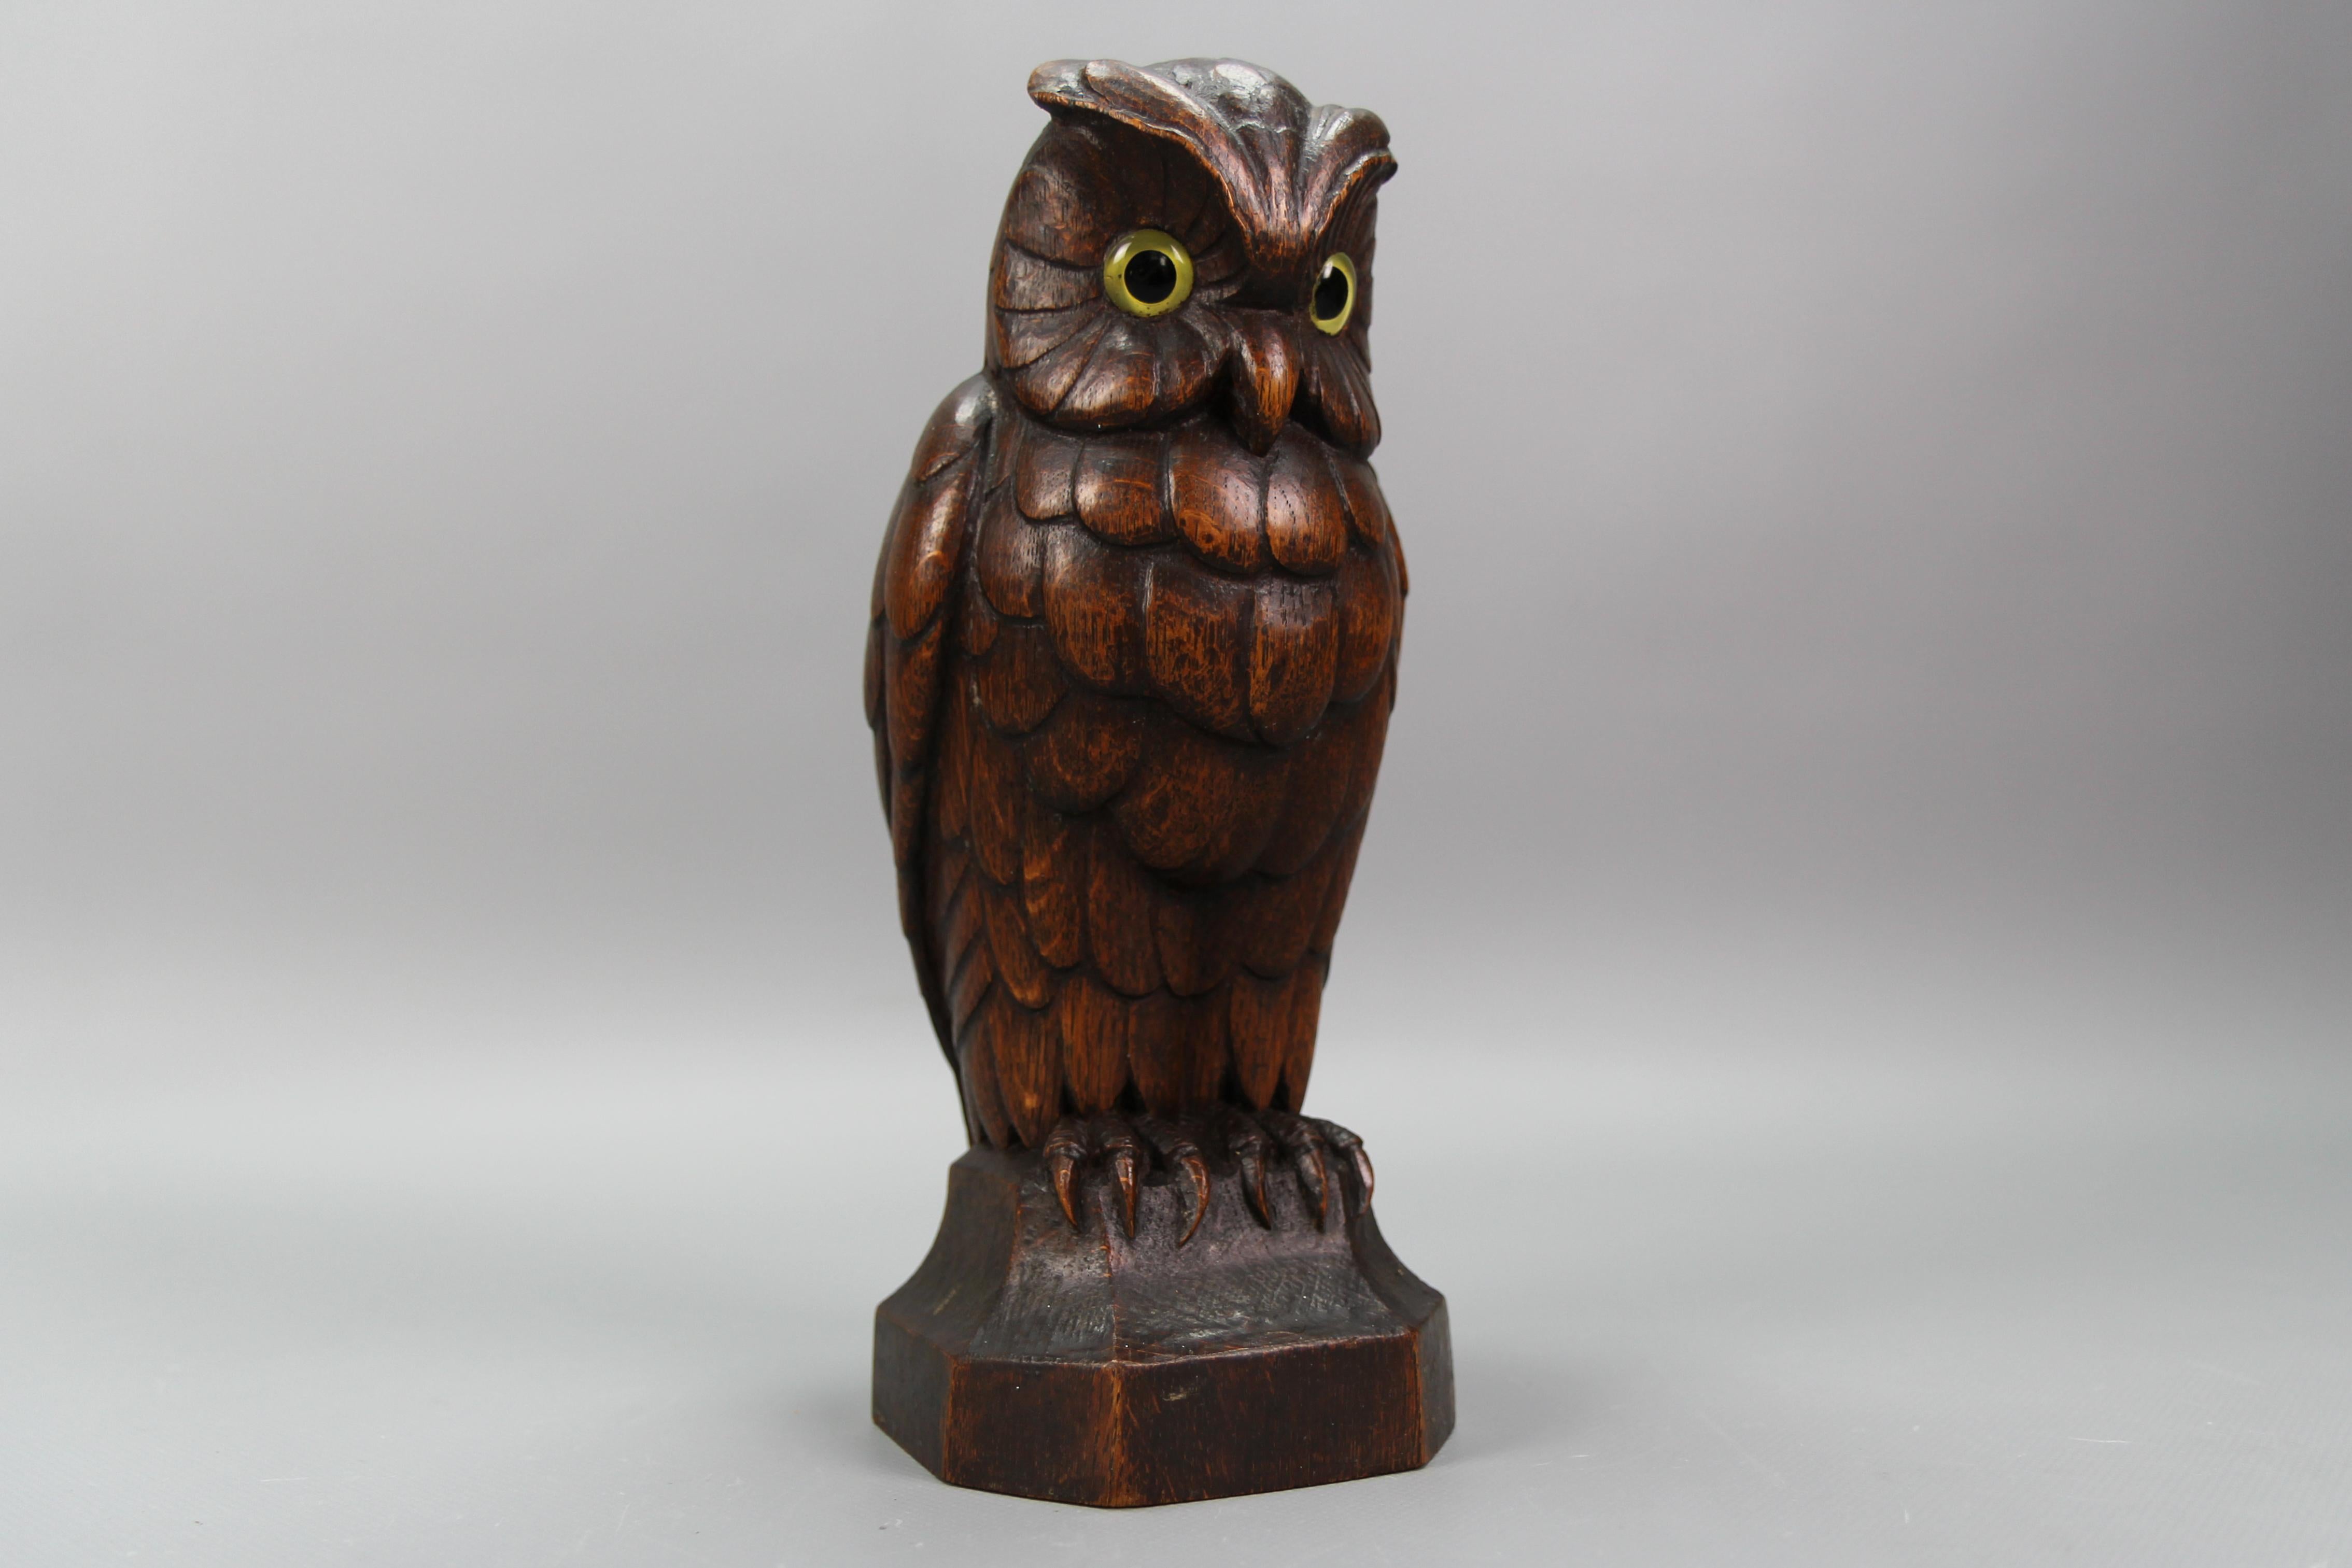 Art Deco style hand-carved oakwood owl sculpture, Germany, circa the 1930s.
This beautiful naturalistically carved dark brown wooden owl with glass eyes, sitting on a wooden base will be a great eye-catcher in any room or interior.
Dimensions: